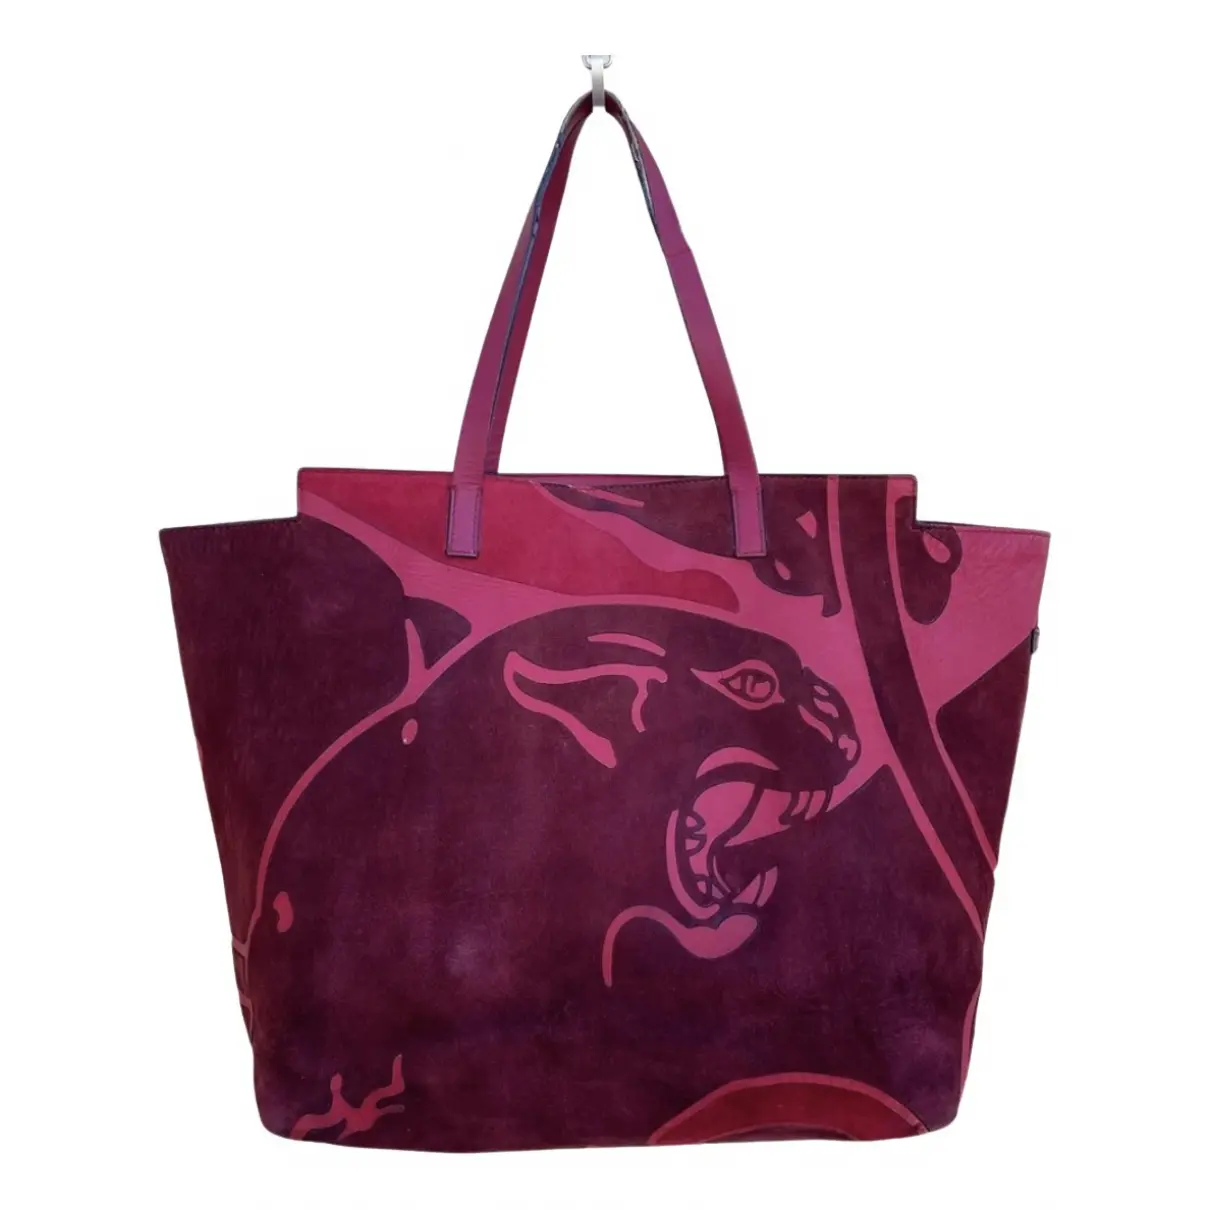 Panther bag leather tote